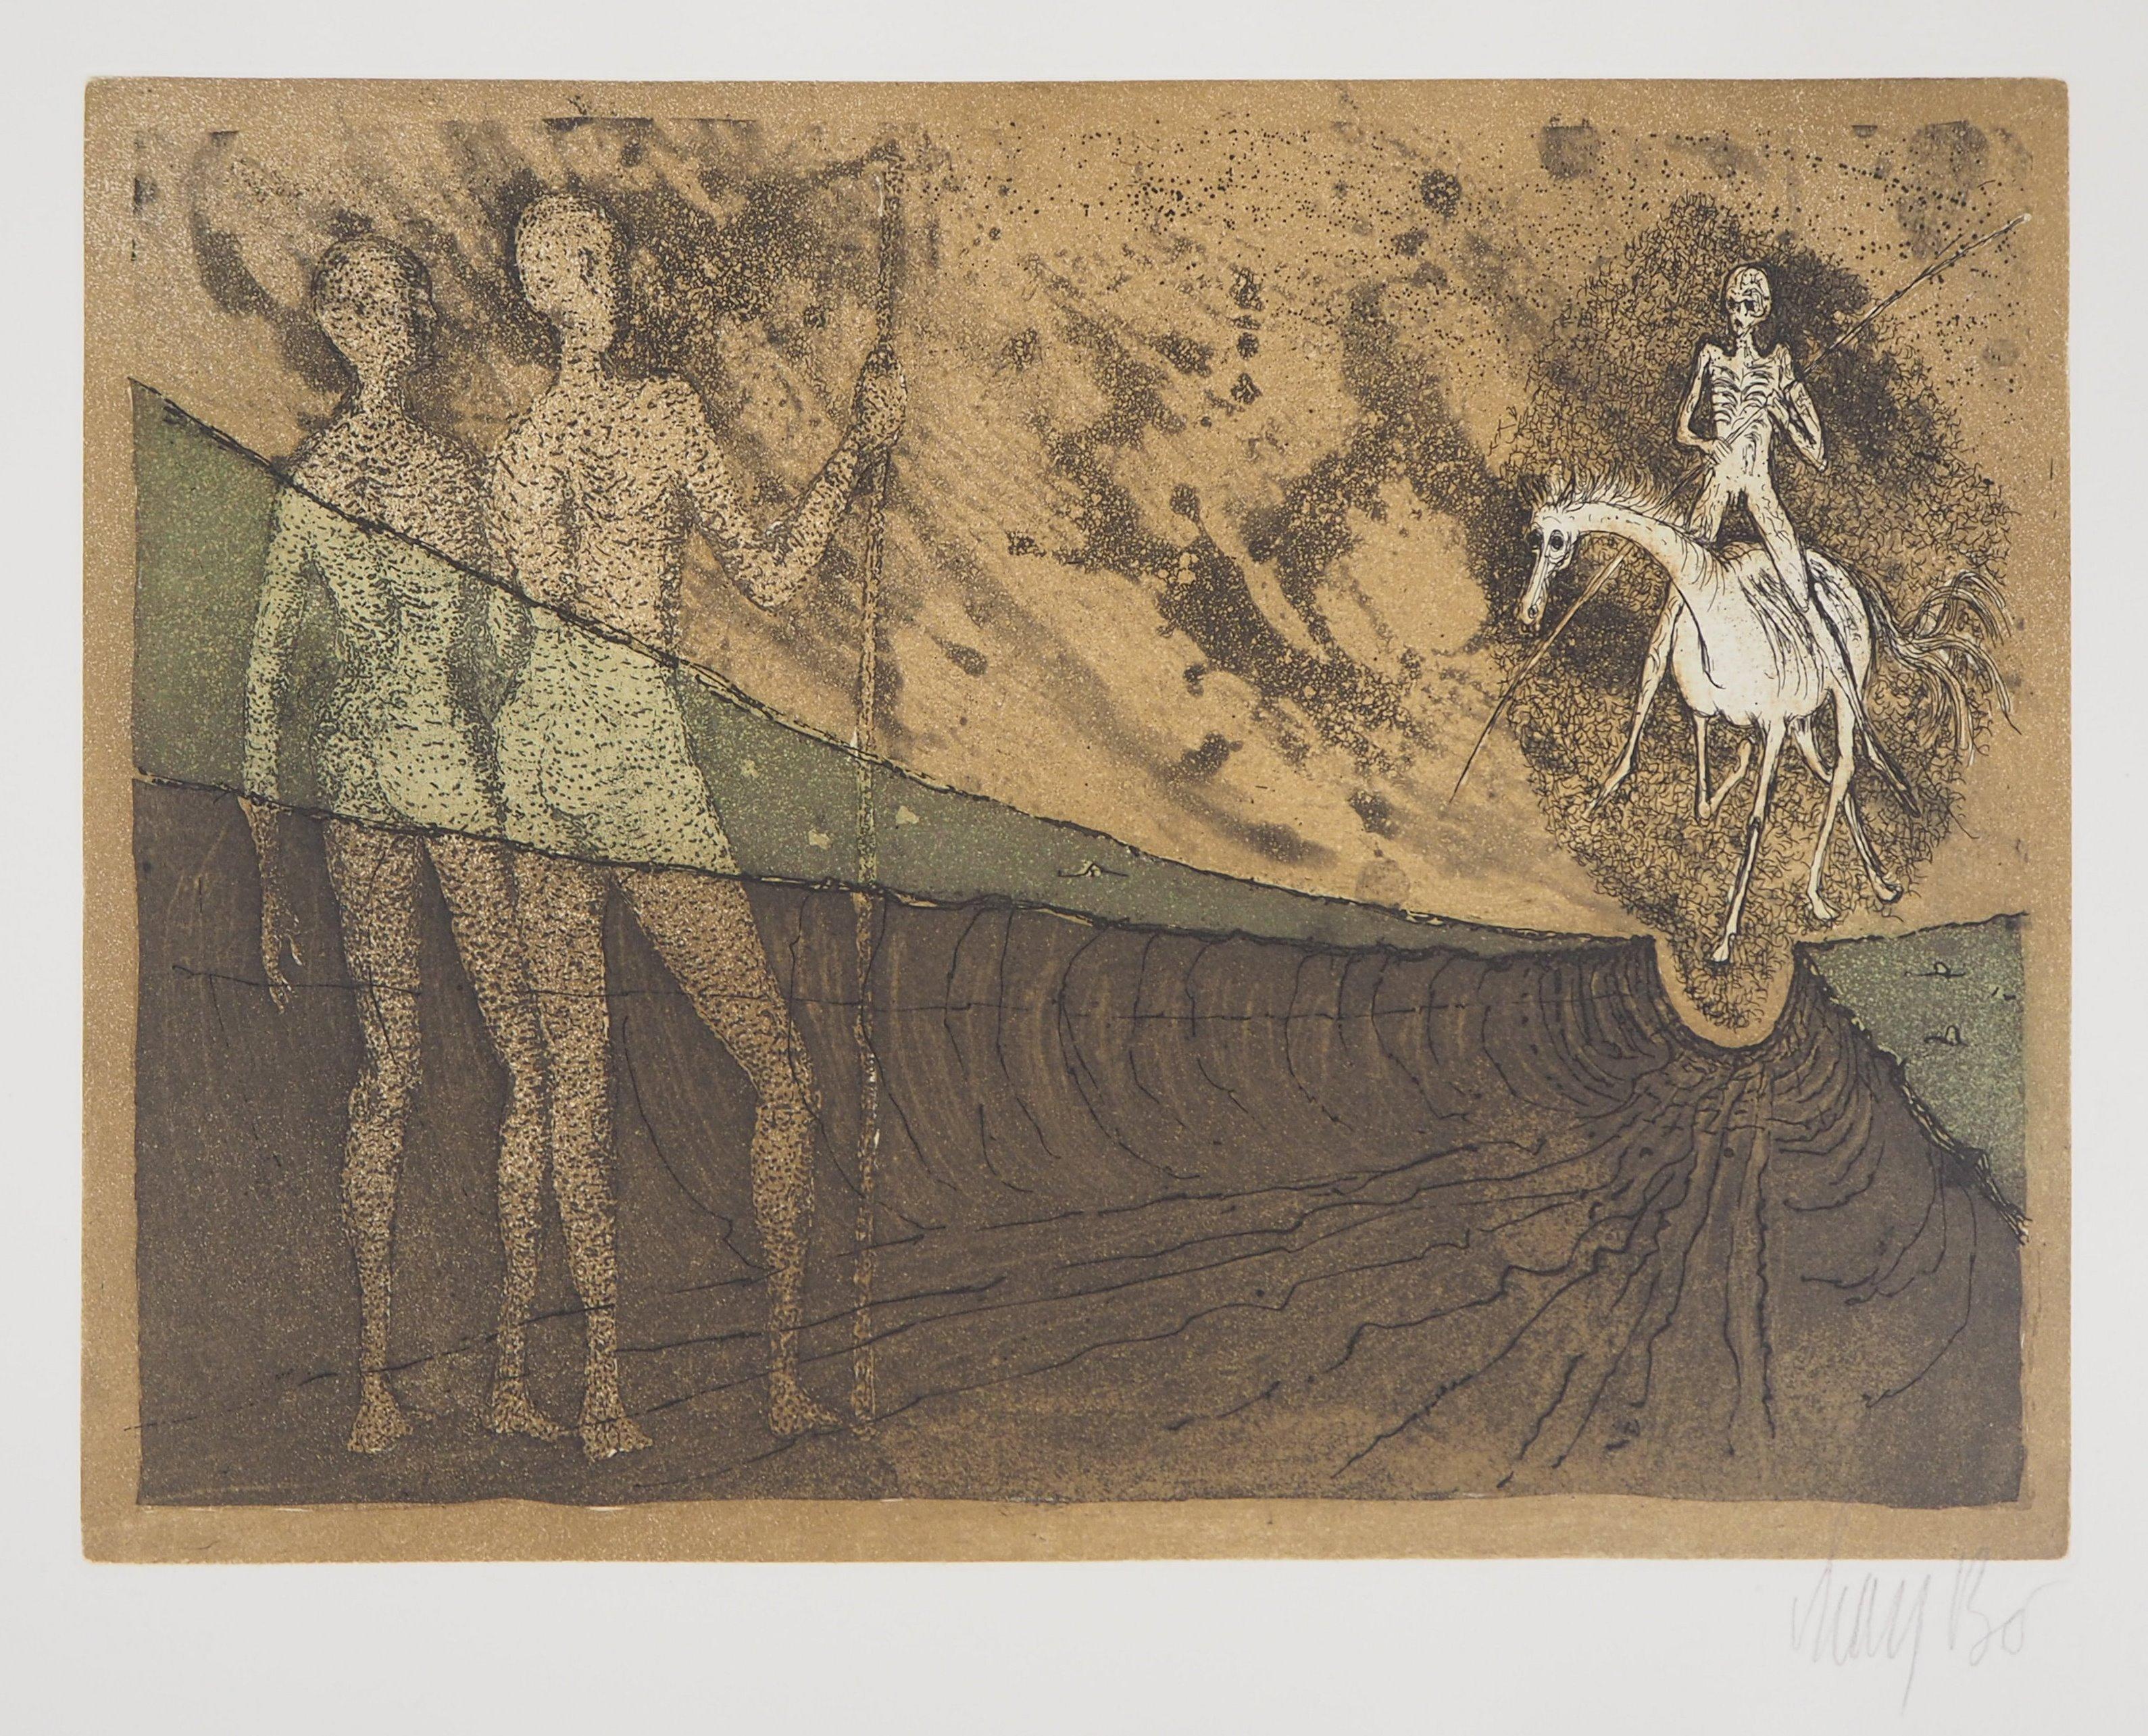 Lars Bo Figurative Print - The Arrival of The Horserider, 1975 - Original Handsigned Etching